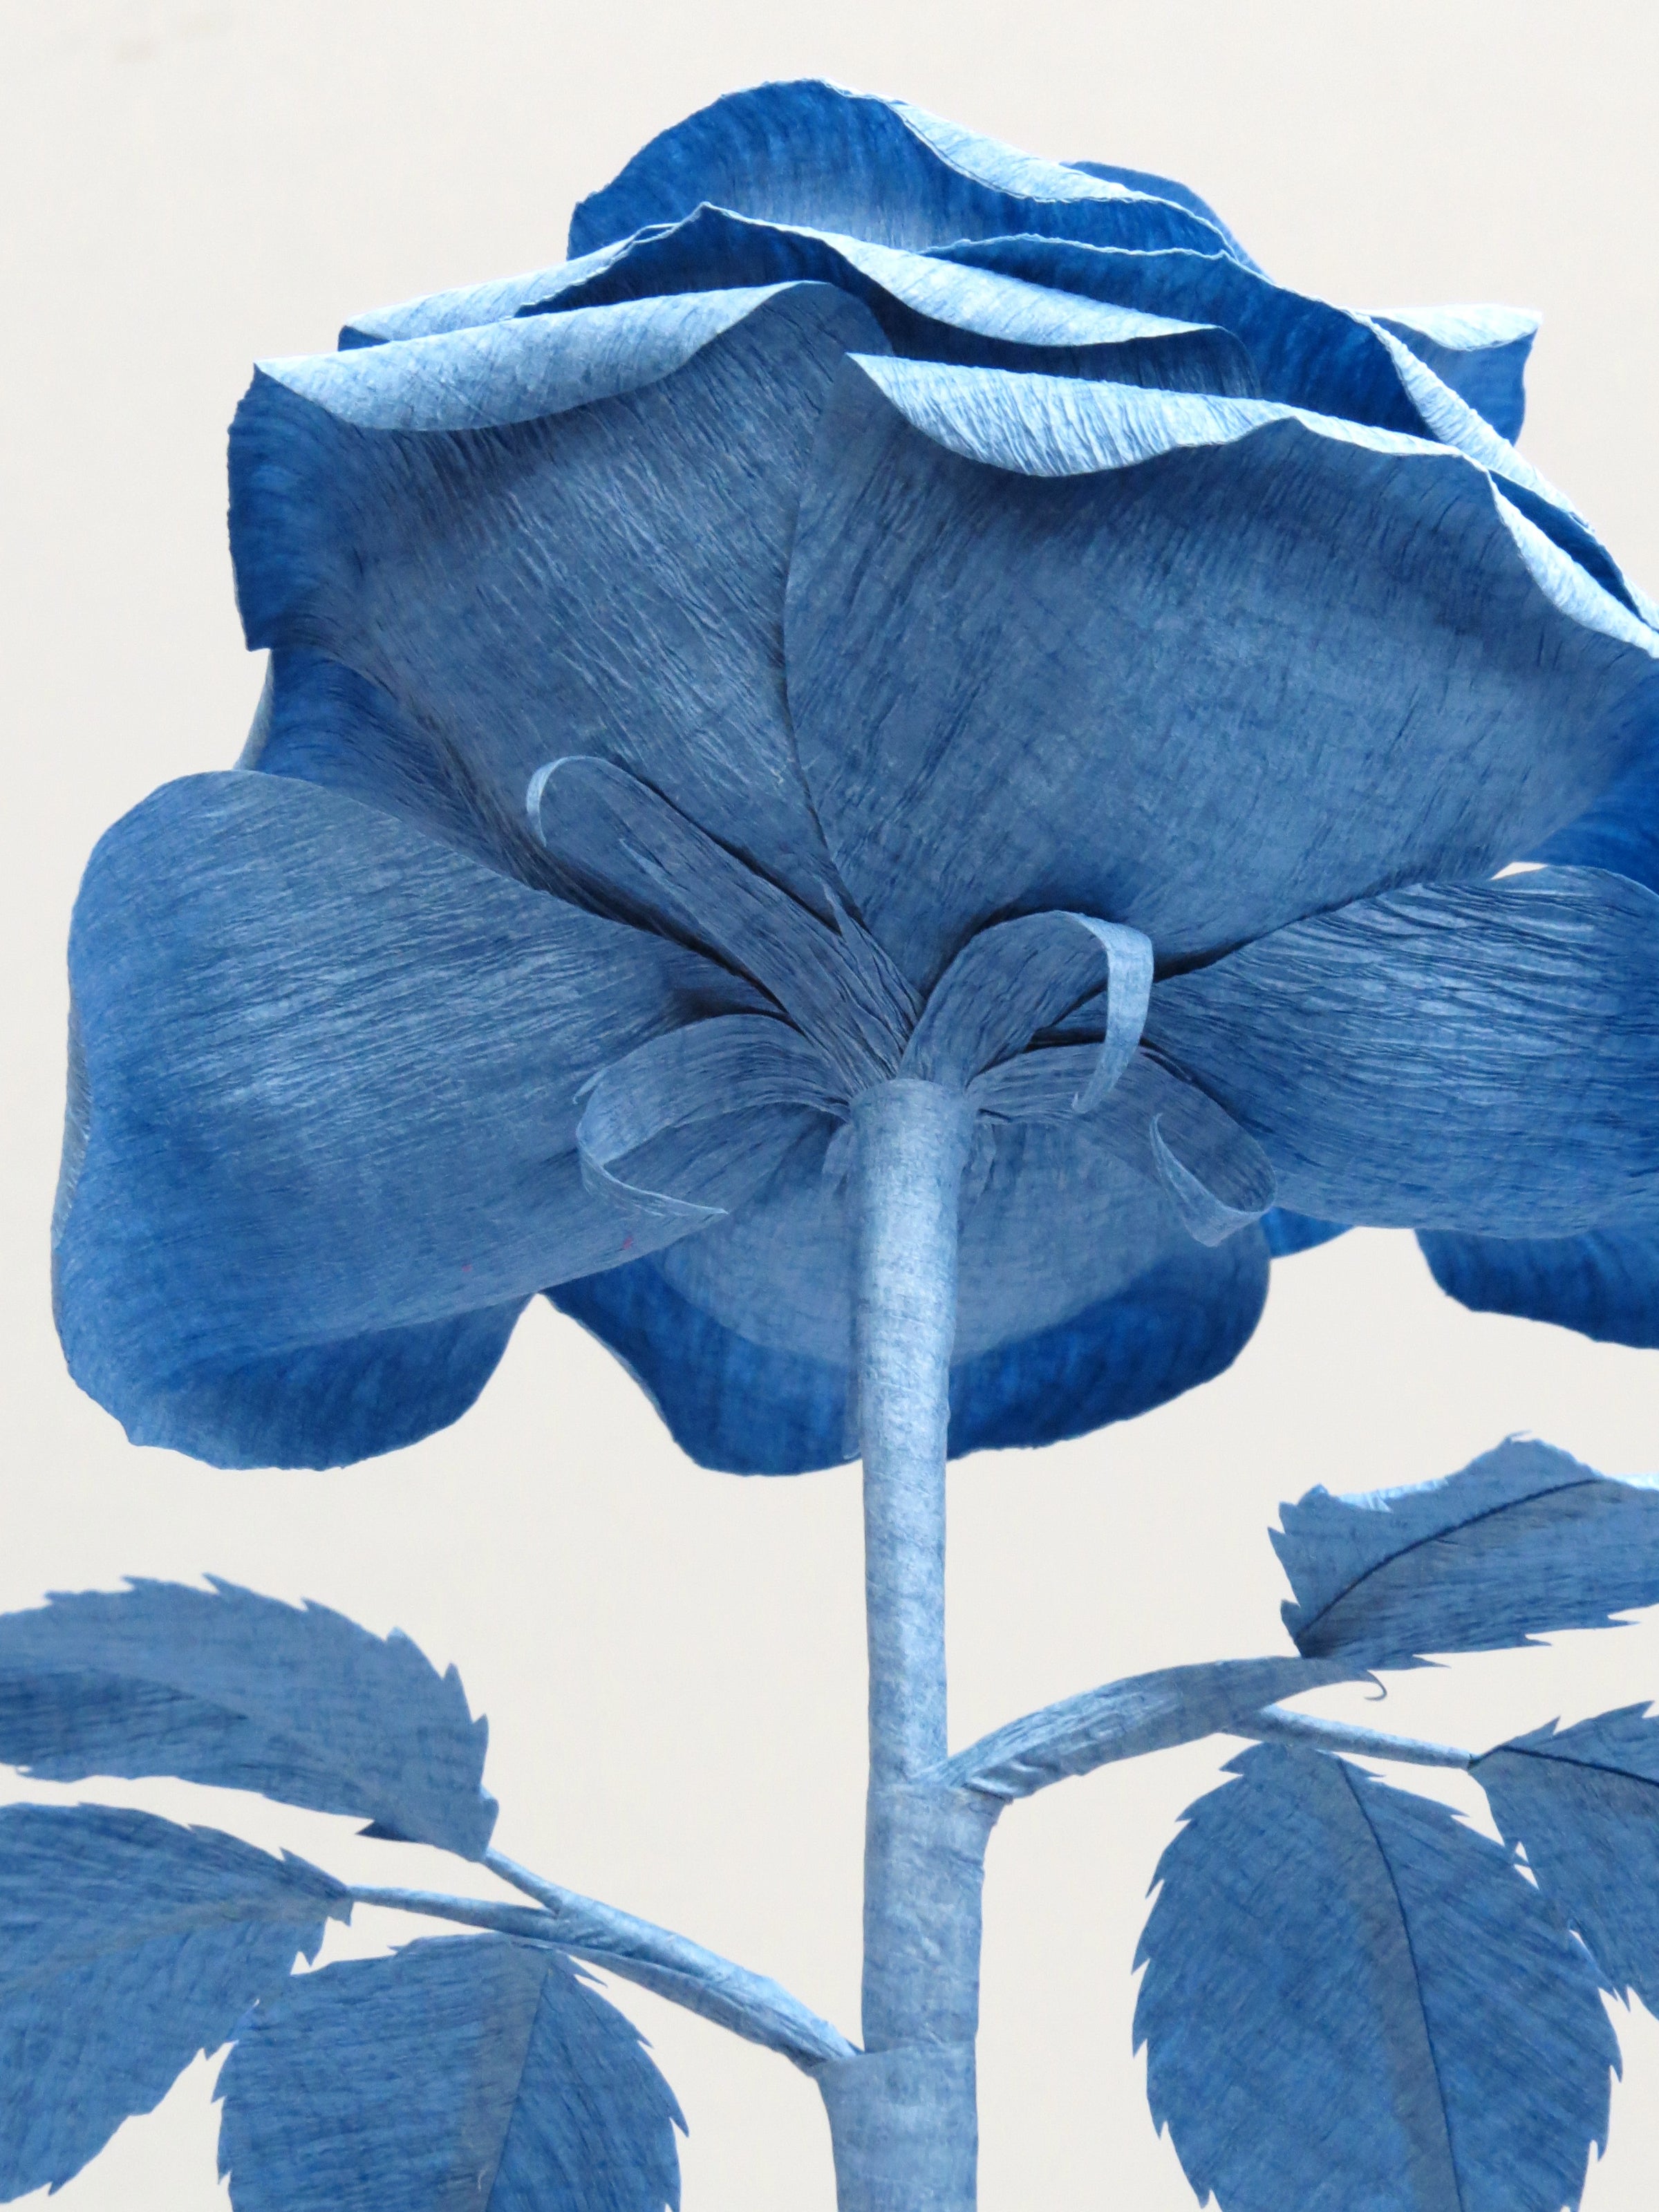 The underneath of the china blue crepe paper rose showing the matching china blue calyx with the china blue stem and the back of the six china blue crepe paper leaves